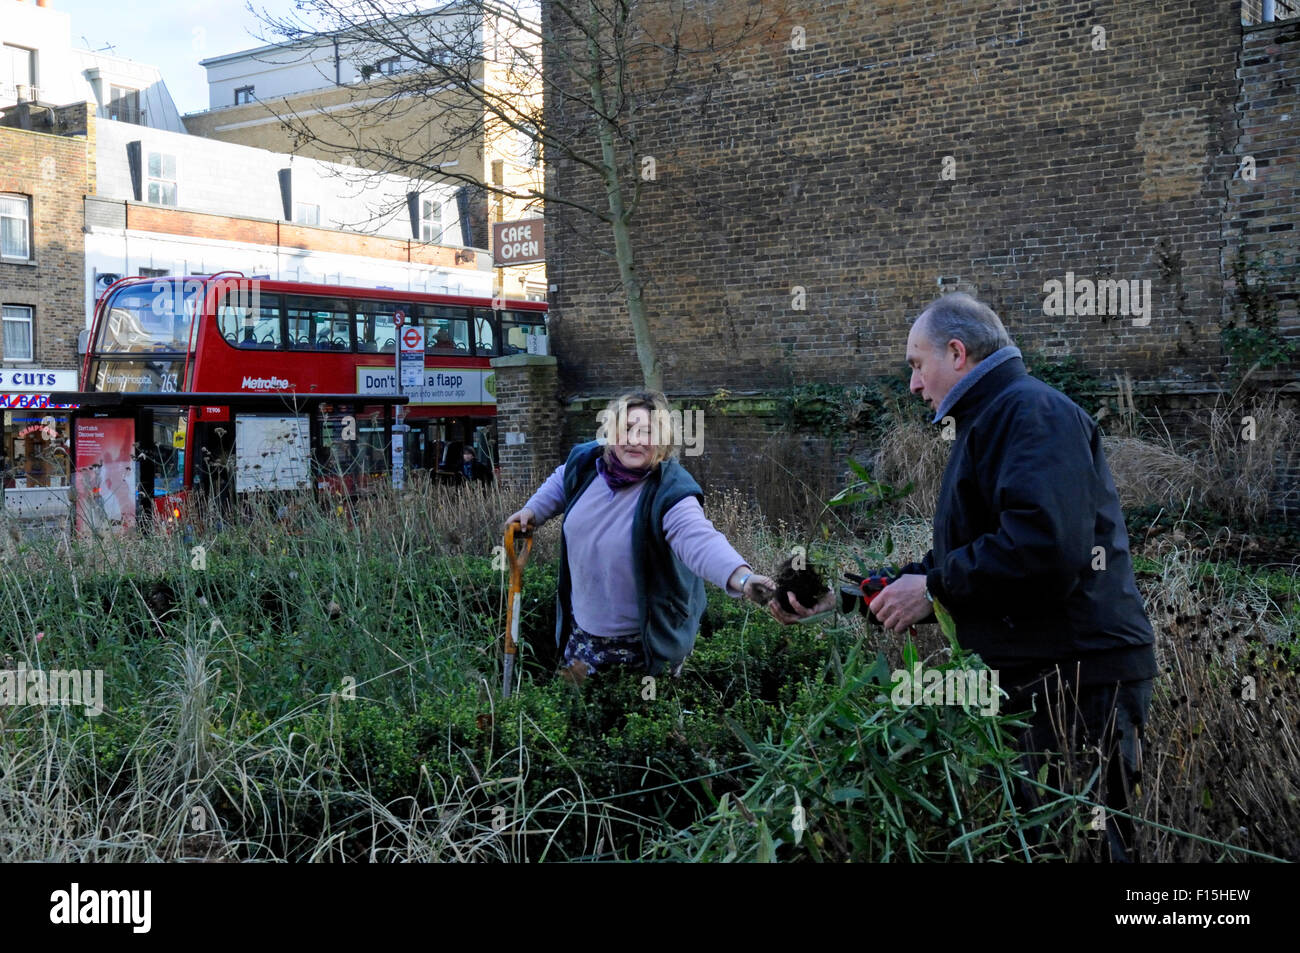 Volunteer gardeners working in a church garden next to the A1, Holloway Road with bus behind, London Borough of Islington. Stock Photo